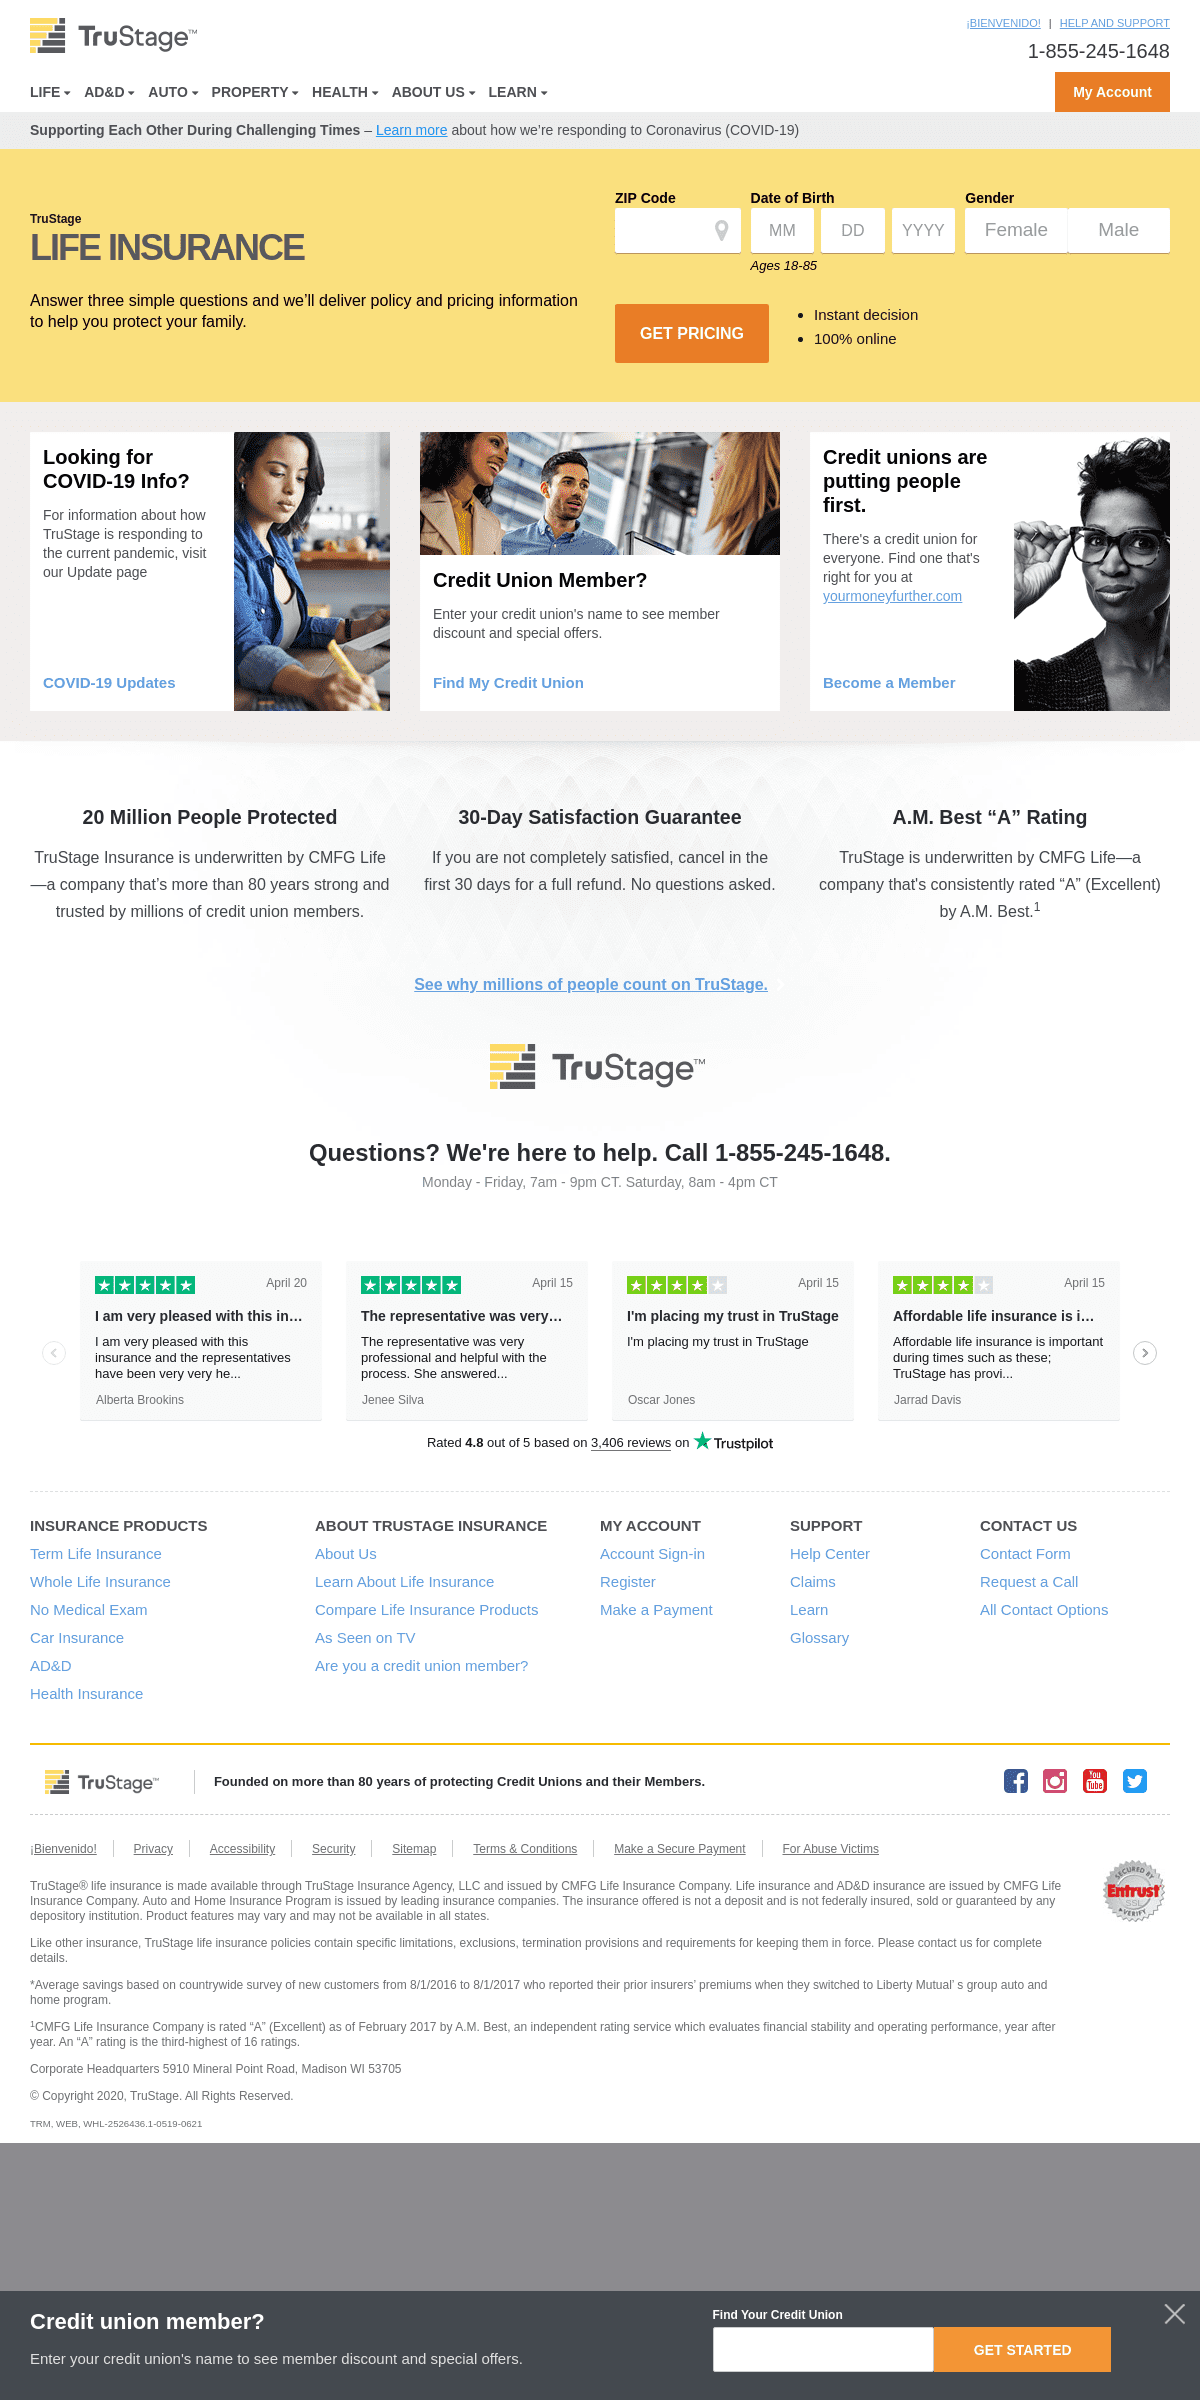 A complete backup of trustage.com